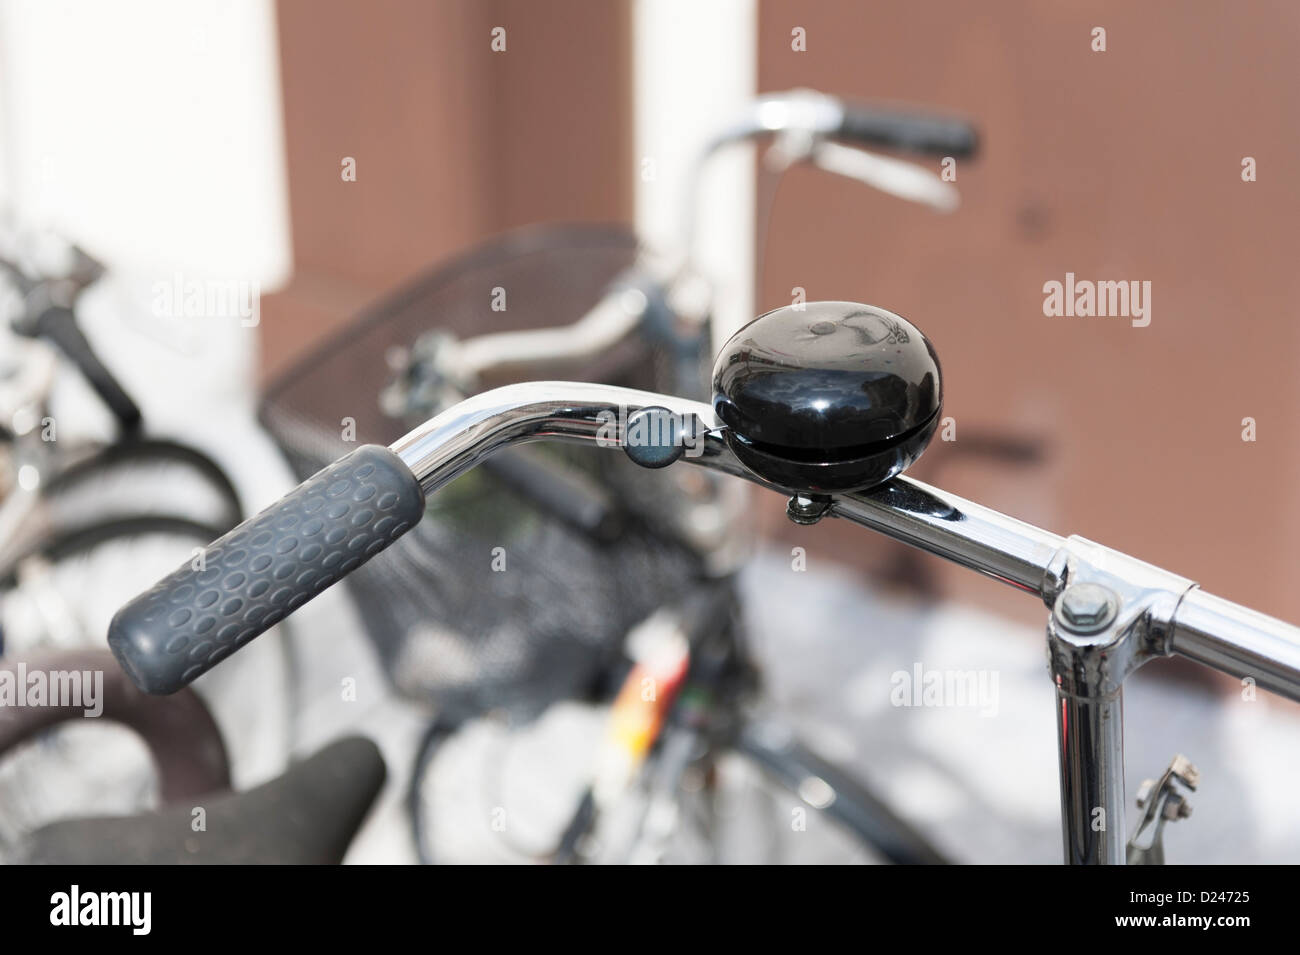 PARIS, FRANCE: Bicycle bell. Stock Photo